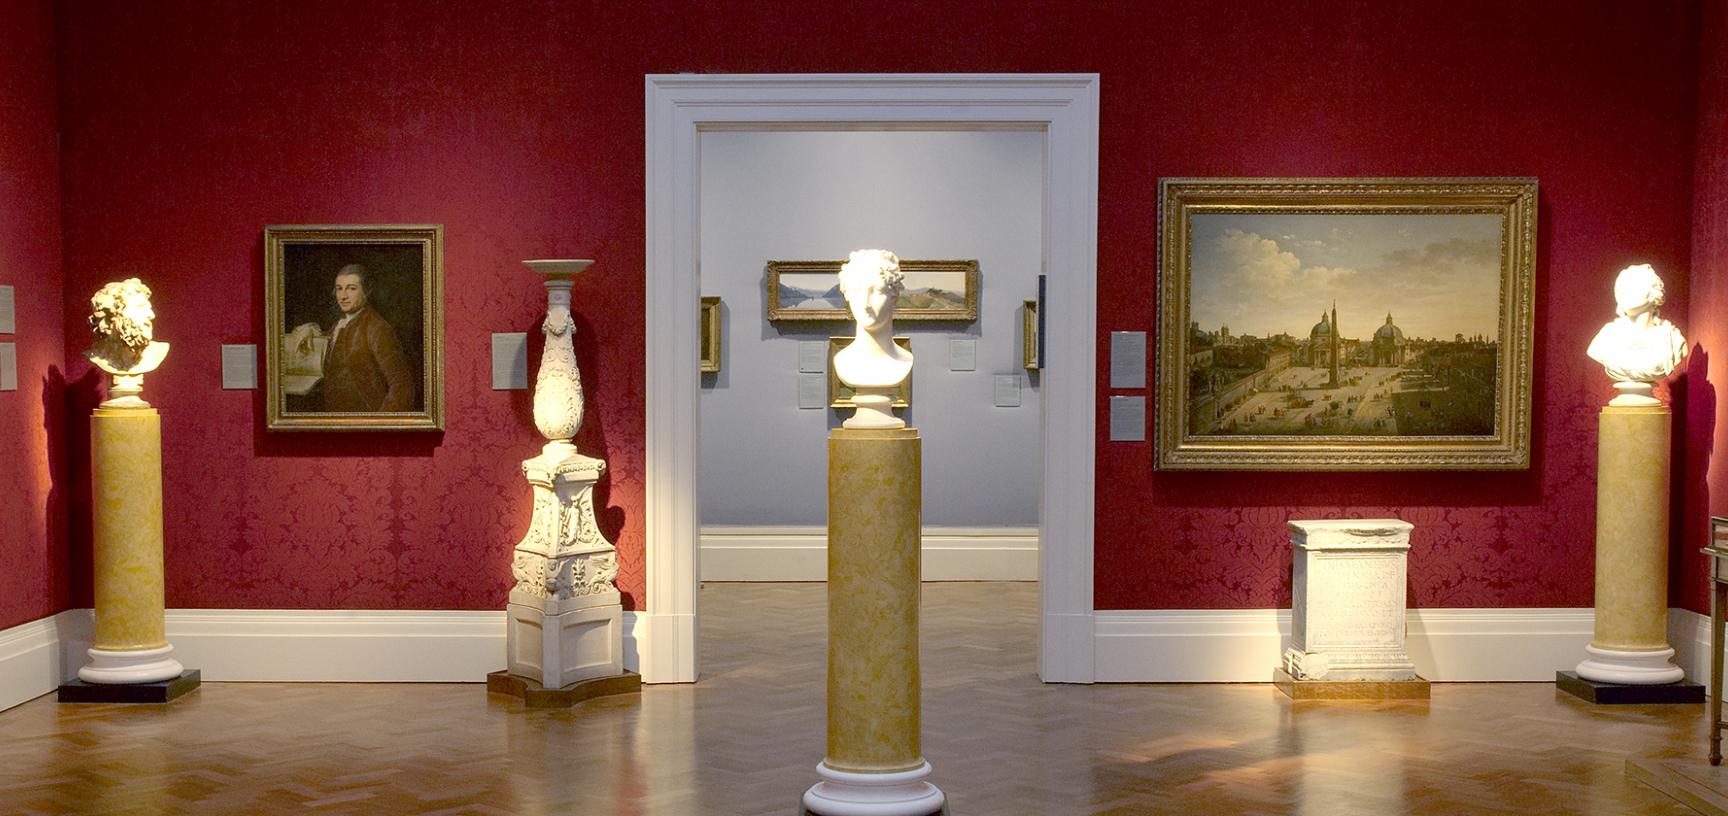 The Britain and Italy Gallery at the Ashmolean Museum